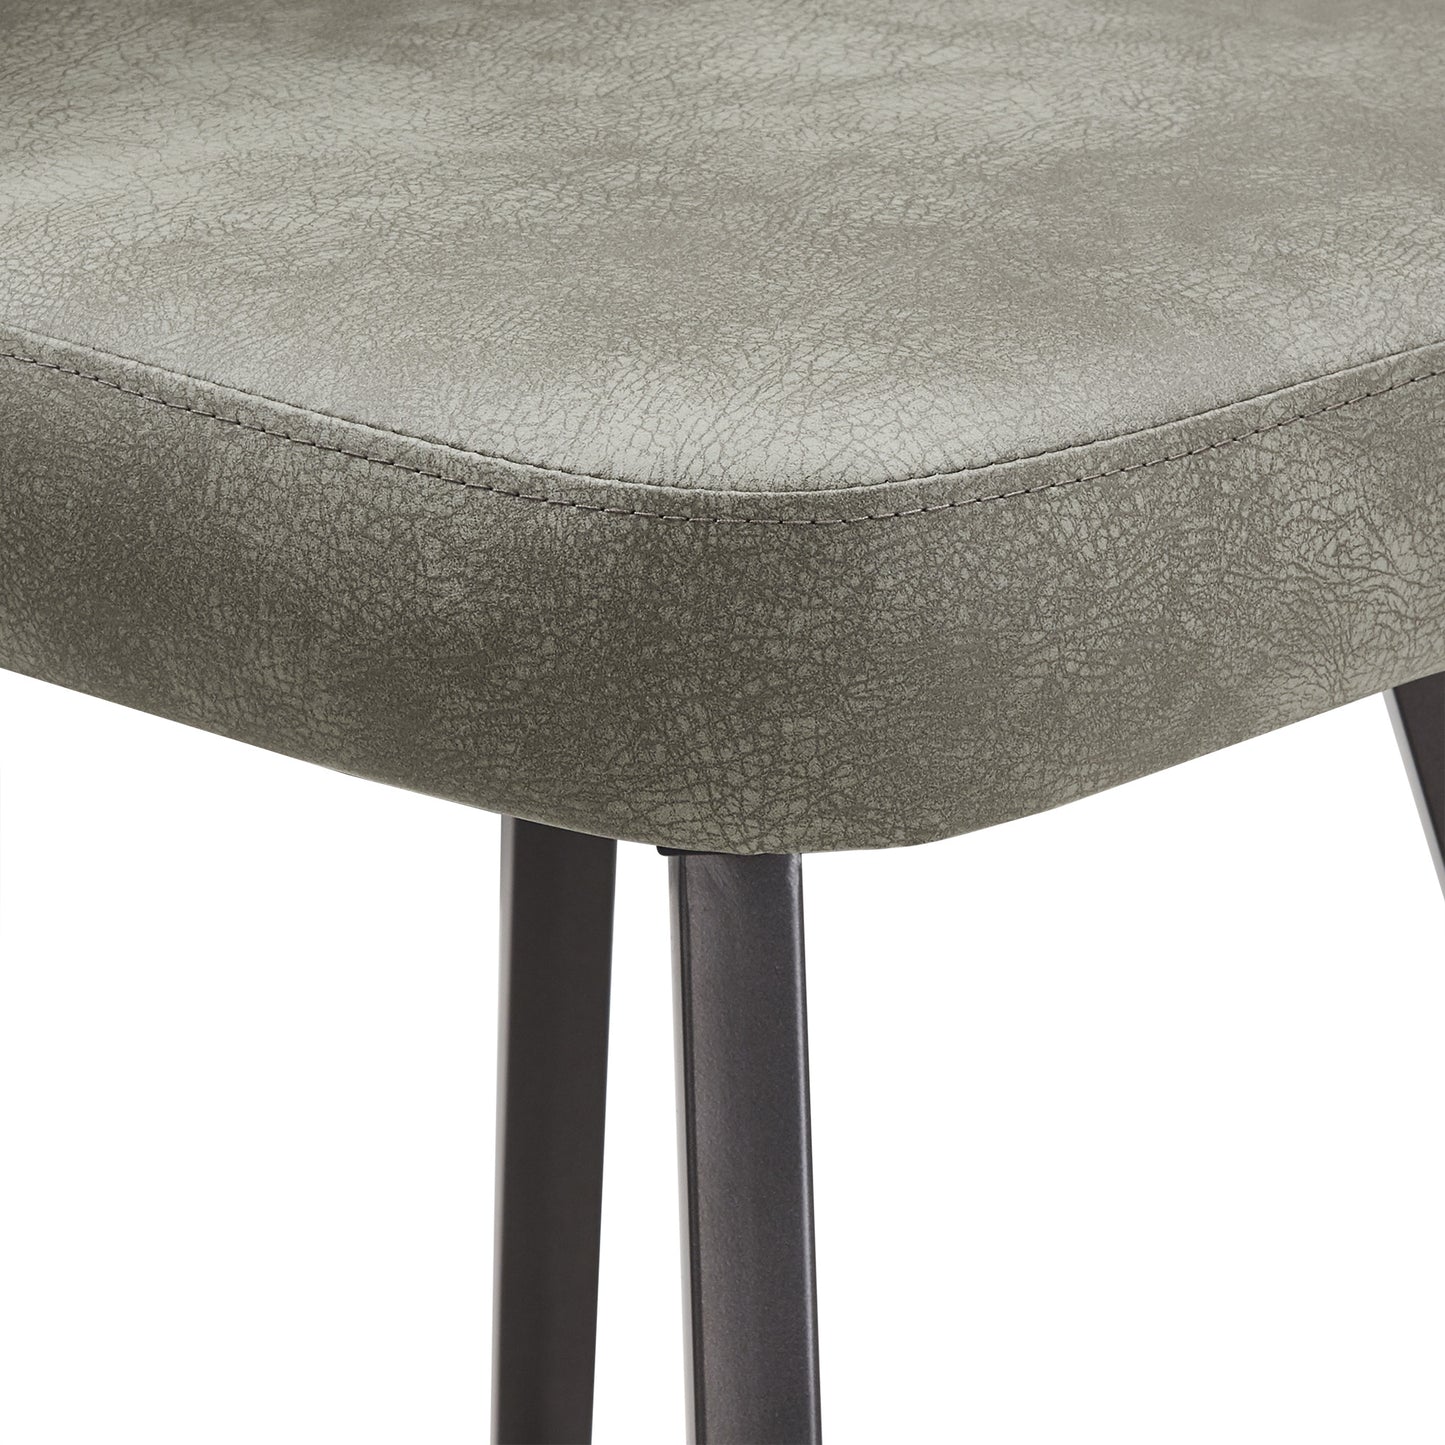 Metal Swivel Stools (Set of 2) - Light Grey PU Leather, 24" Counter Height